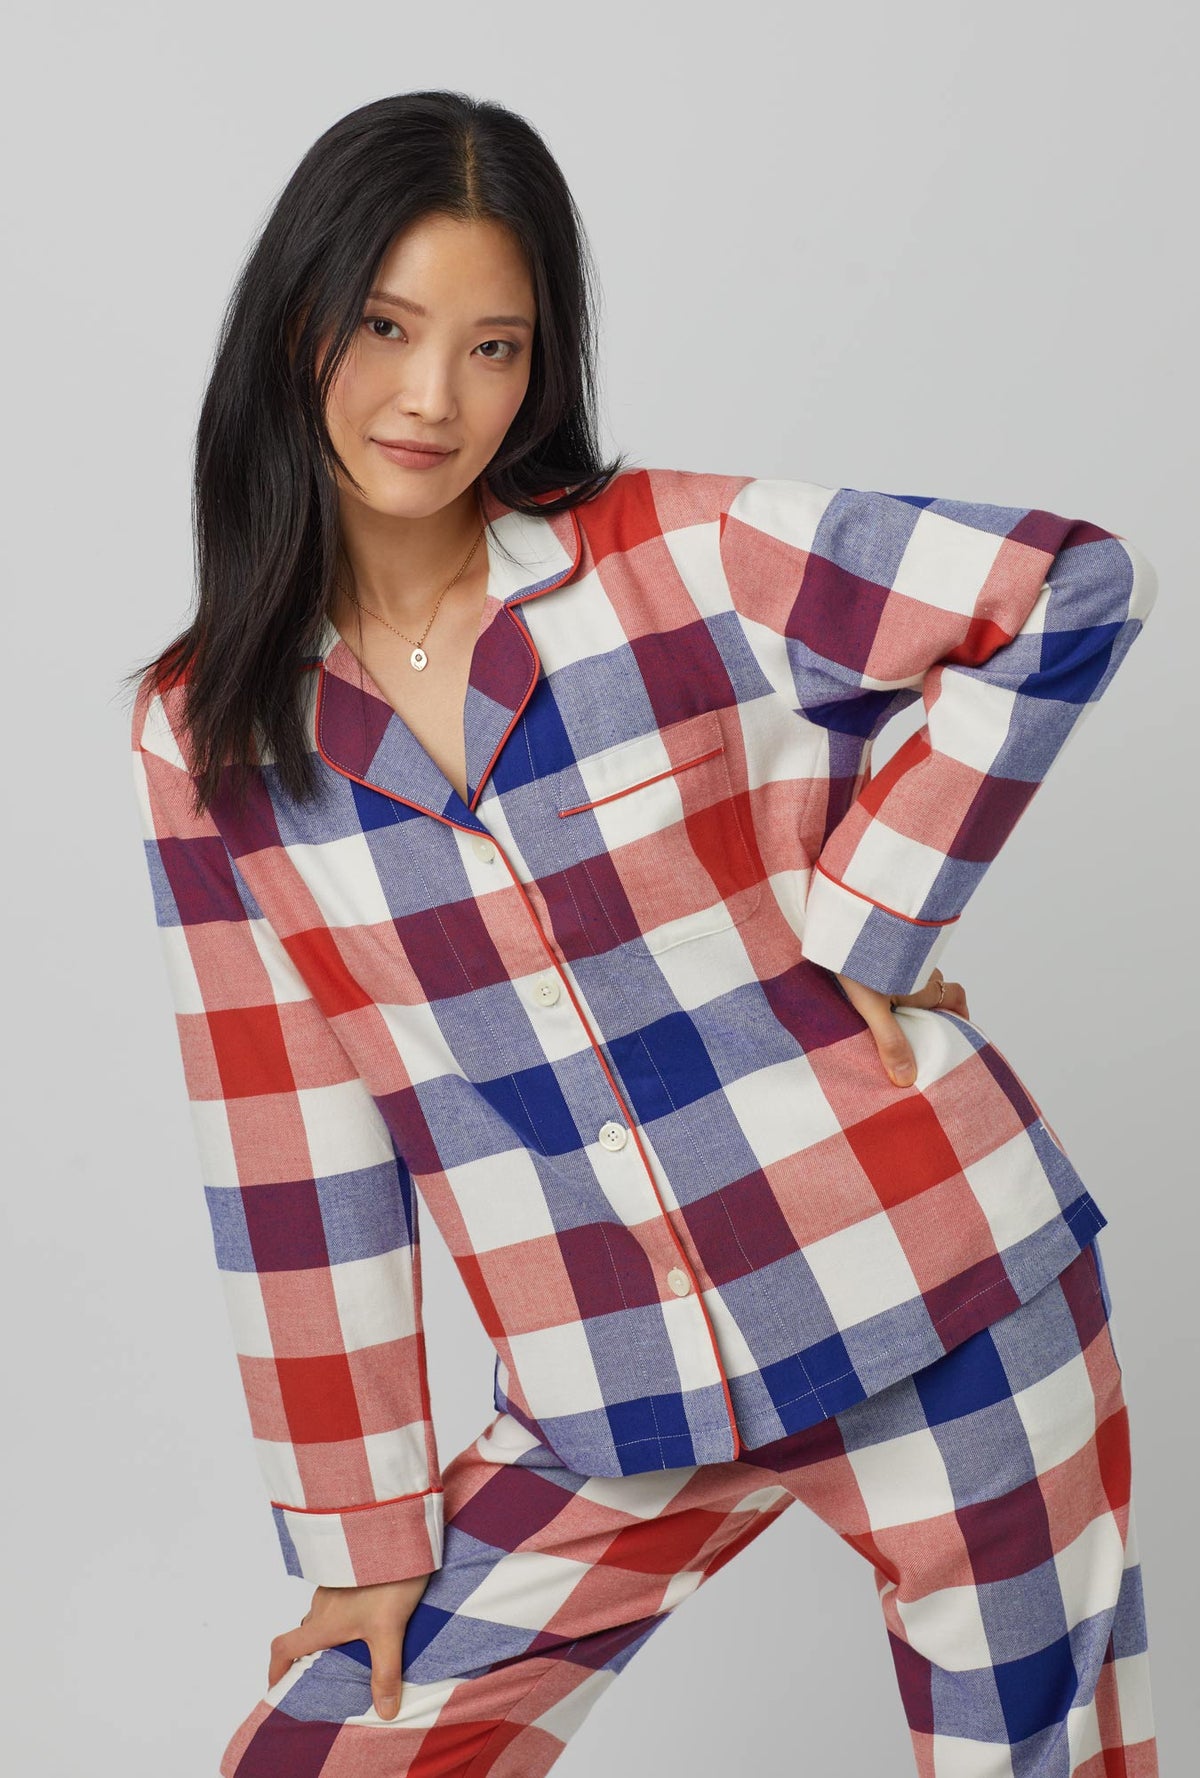 A lady wearing Long Sleeve Classic Woven Portugese Flannel Twill PJ Set with Harvest Plaid print.